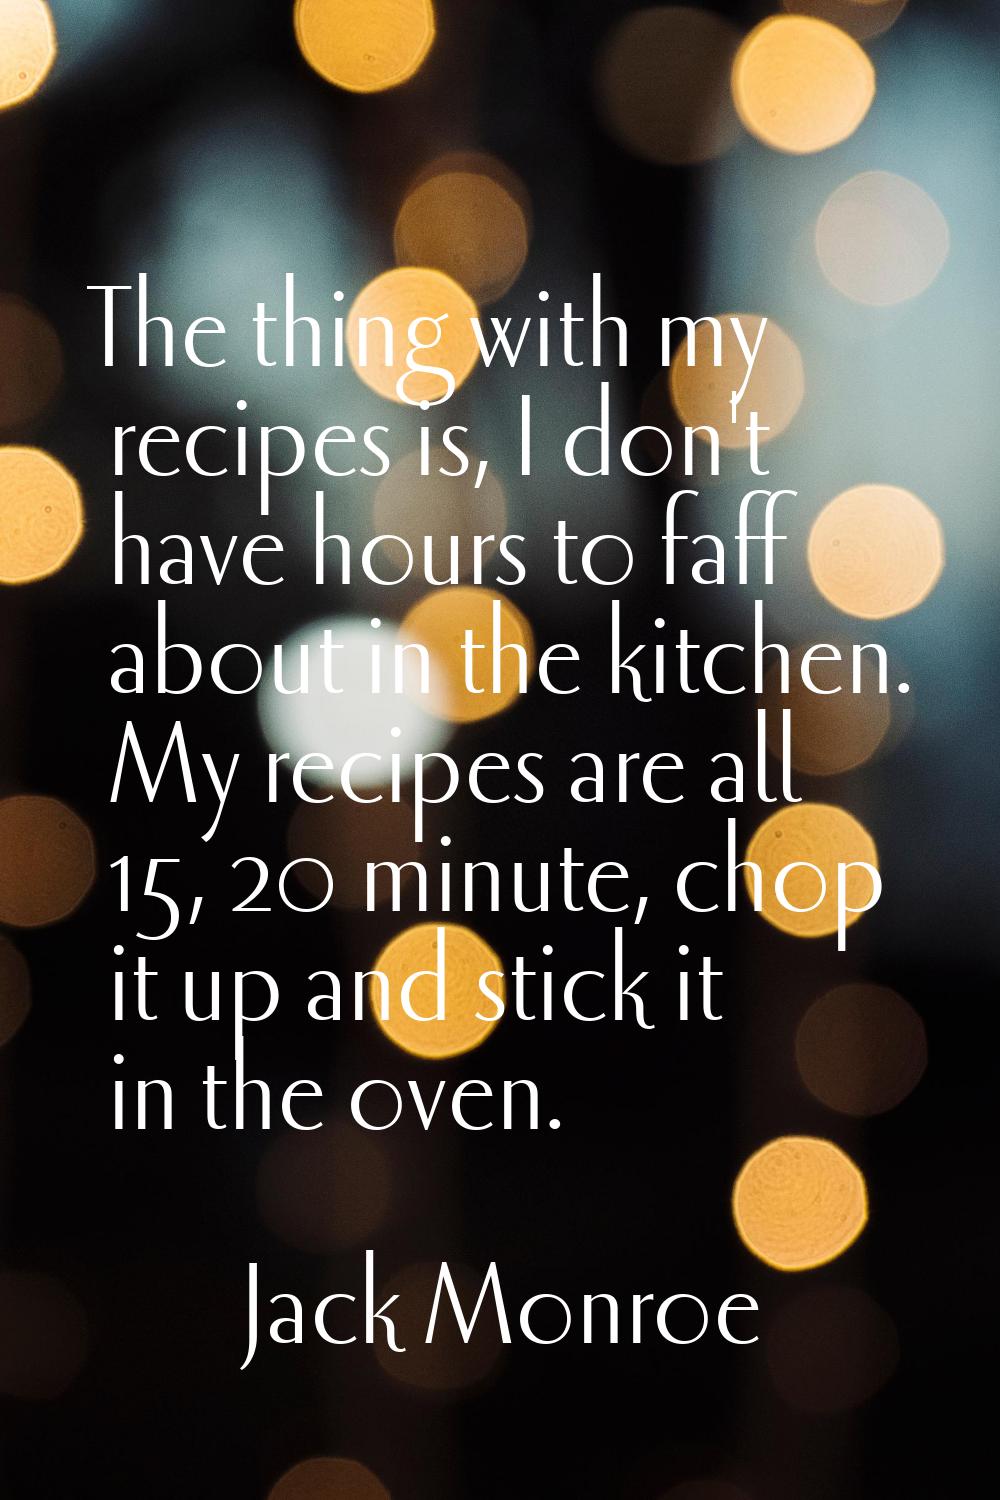 The thing with my recipes is, I don't have hours to faff about in the kitchen. My recipes are all 1